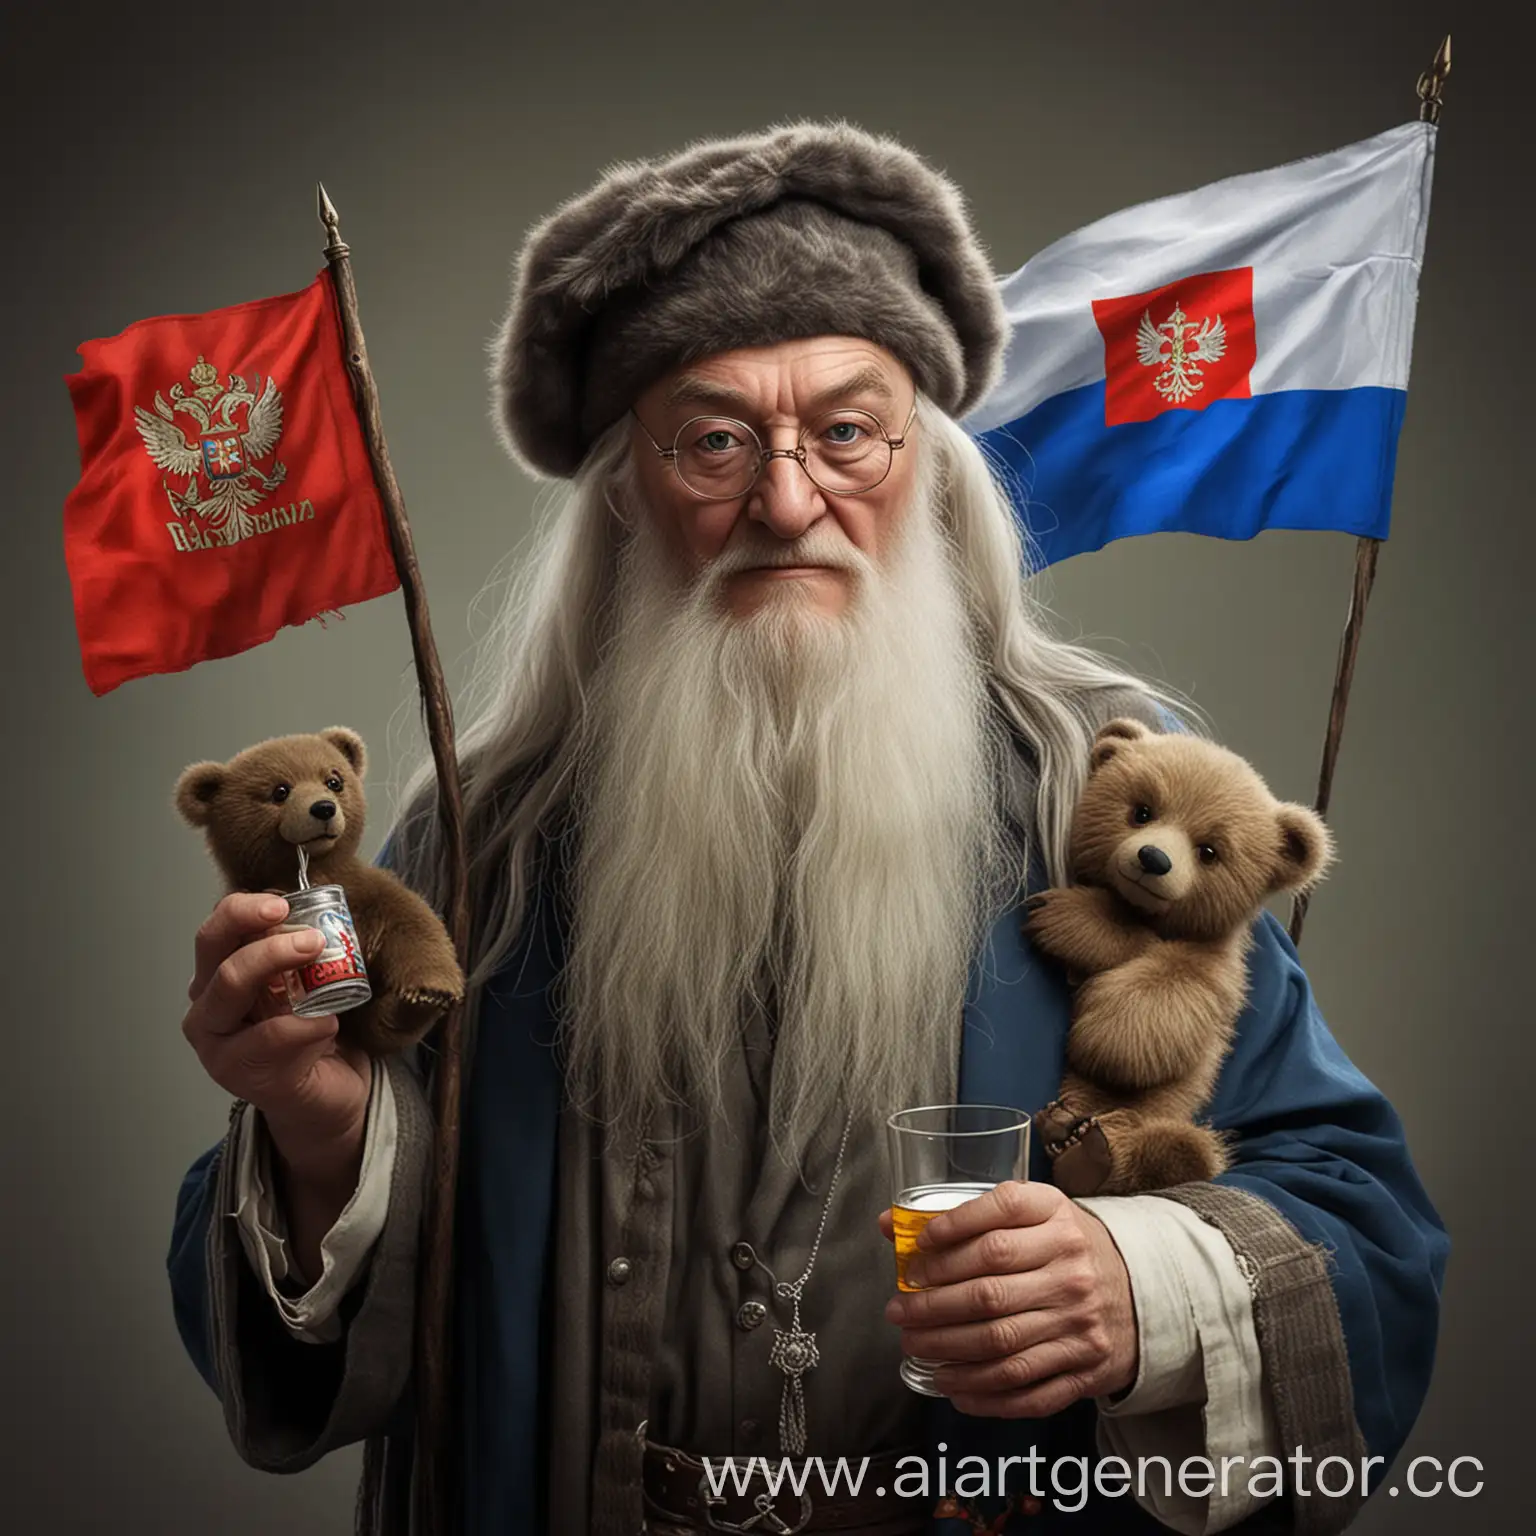 russian dumbledore with vodka and bear and flag russia in hand